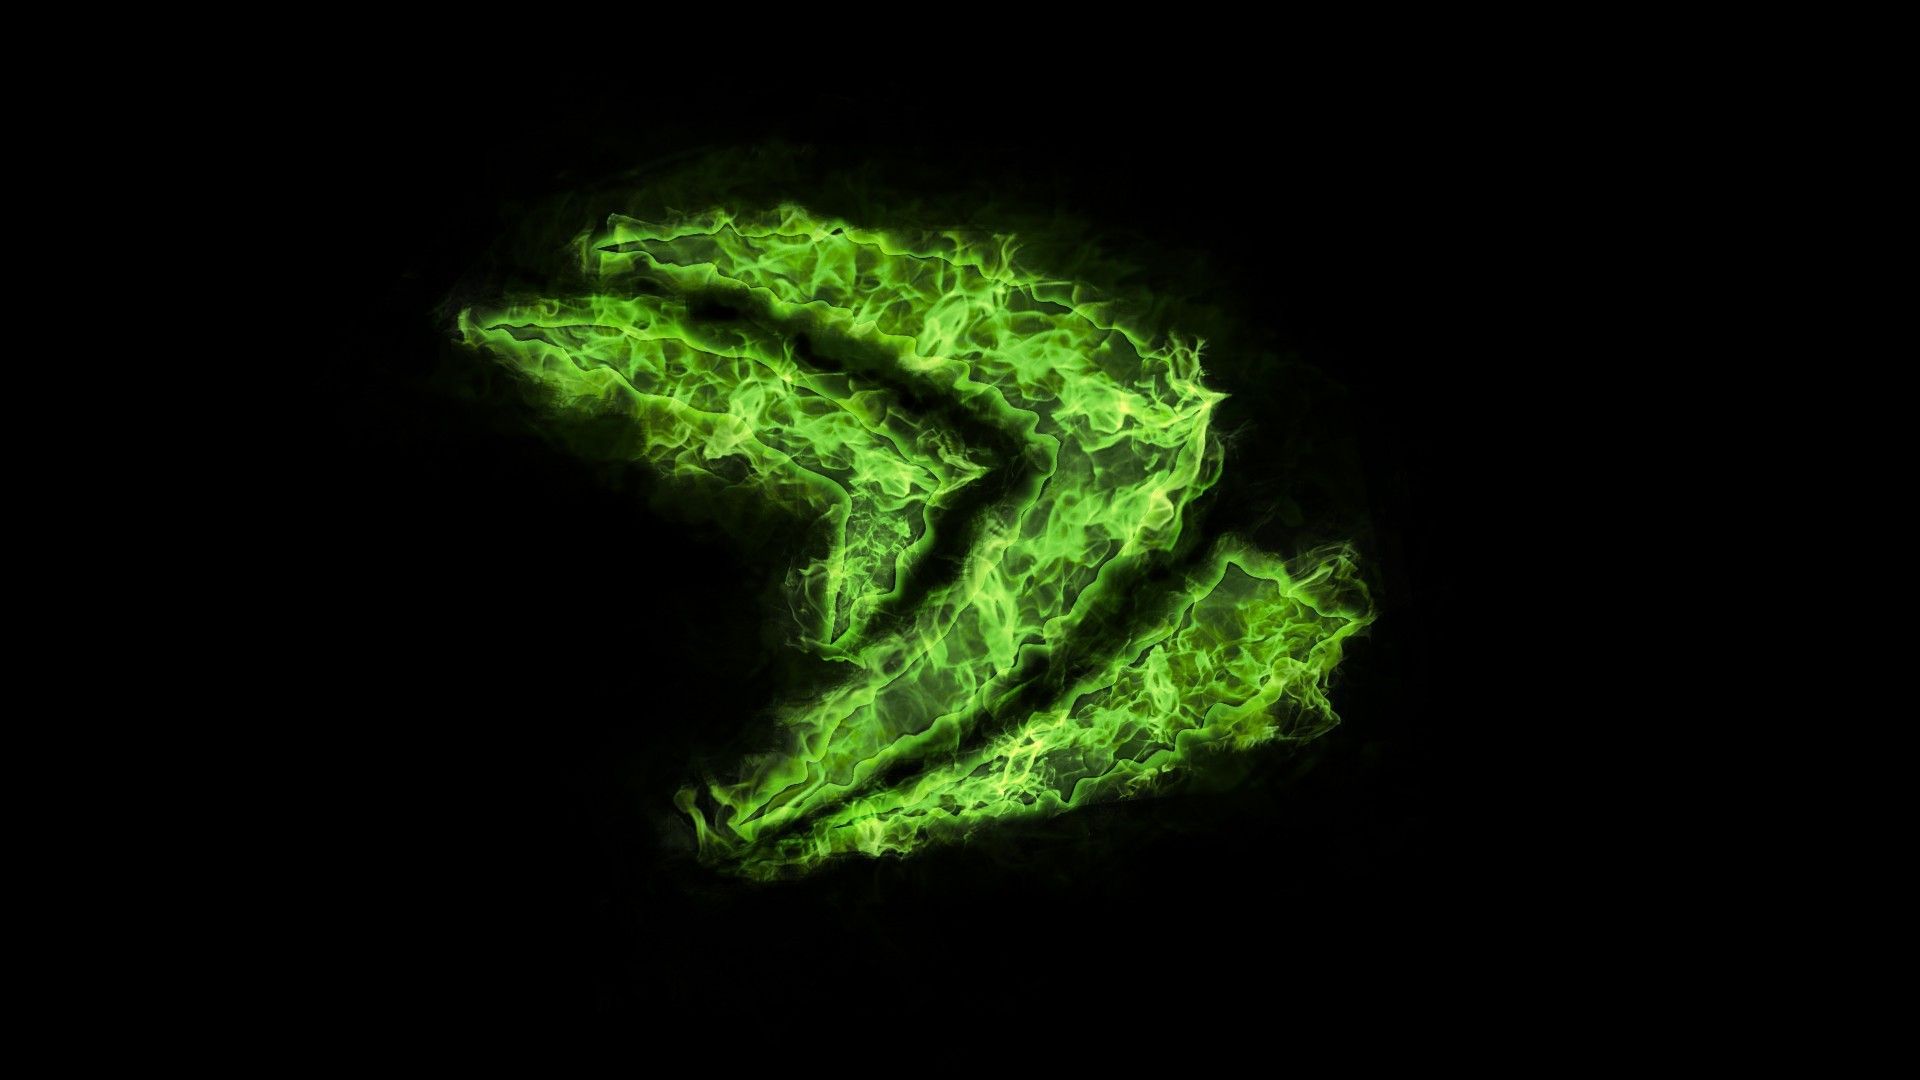 Logo Nvidia green flame wallpapers and images - wallpapers ...